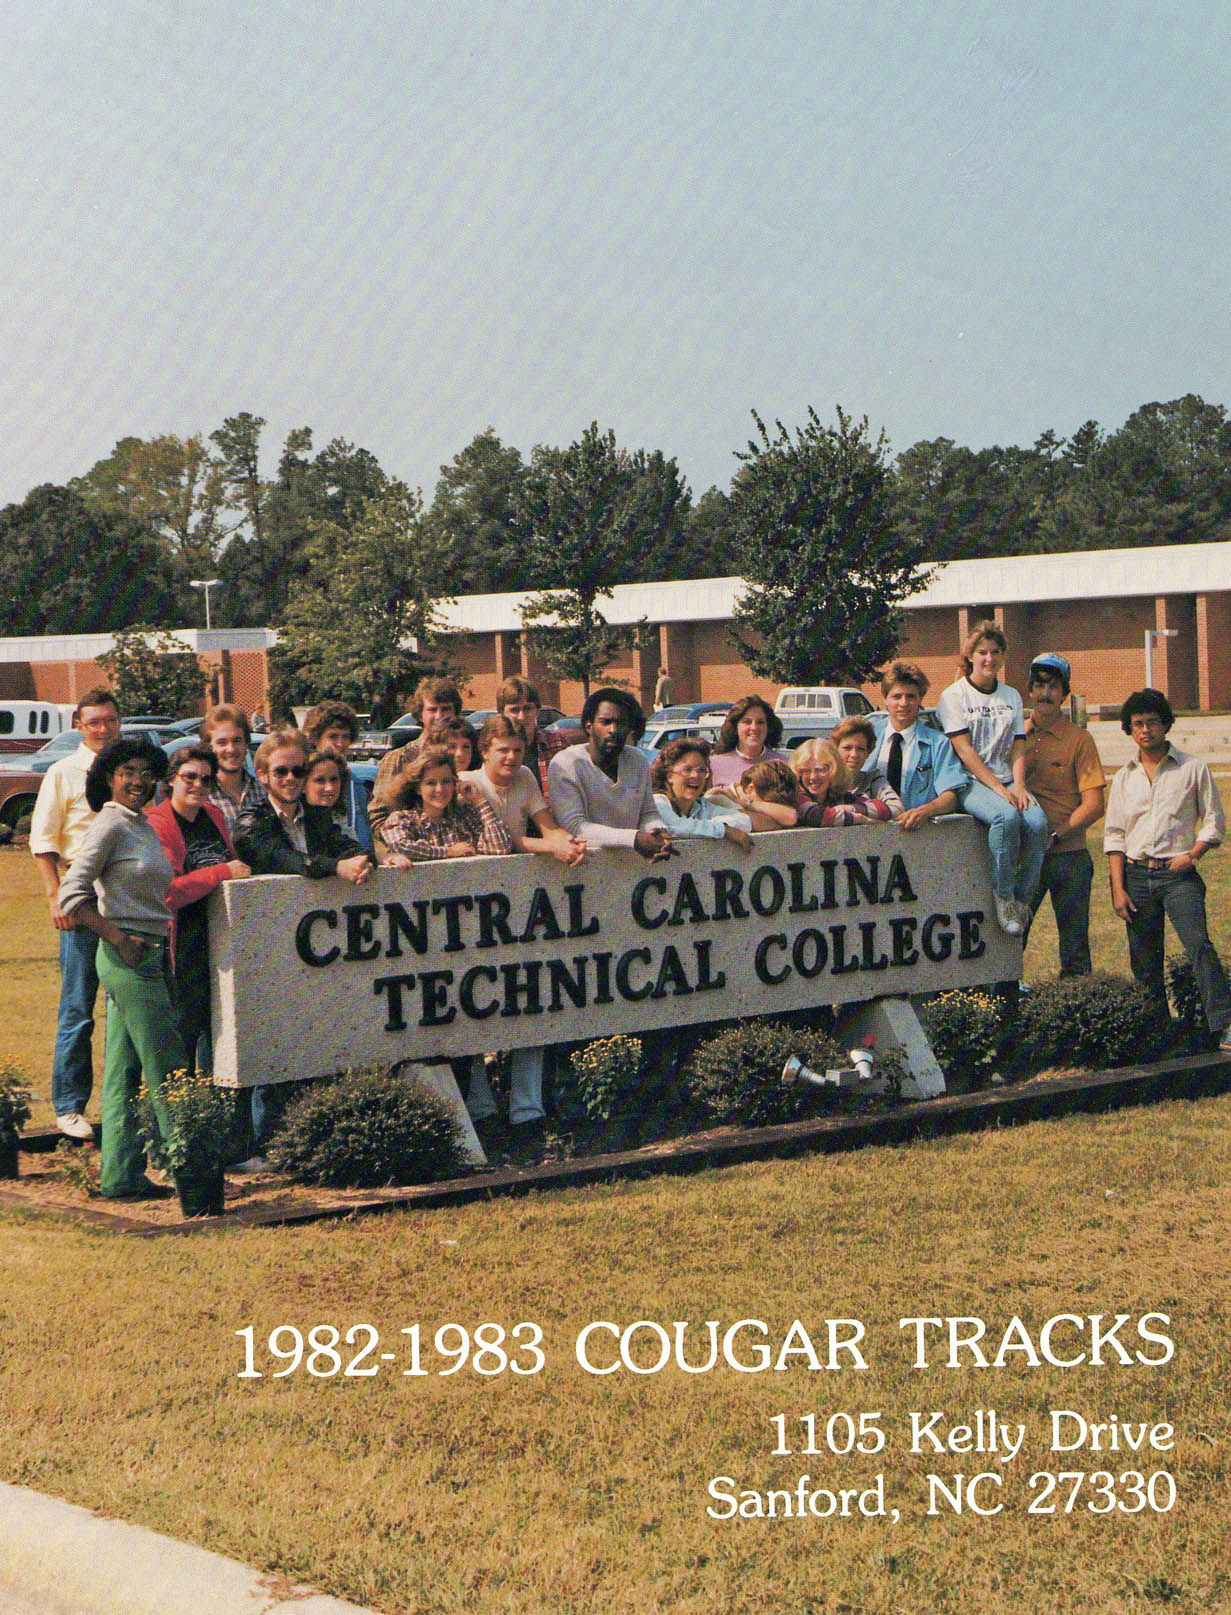  CCCC yearbooks, history online